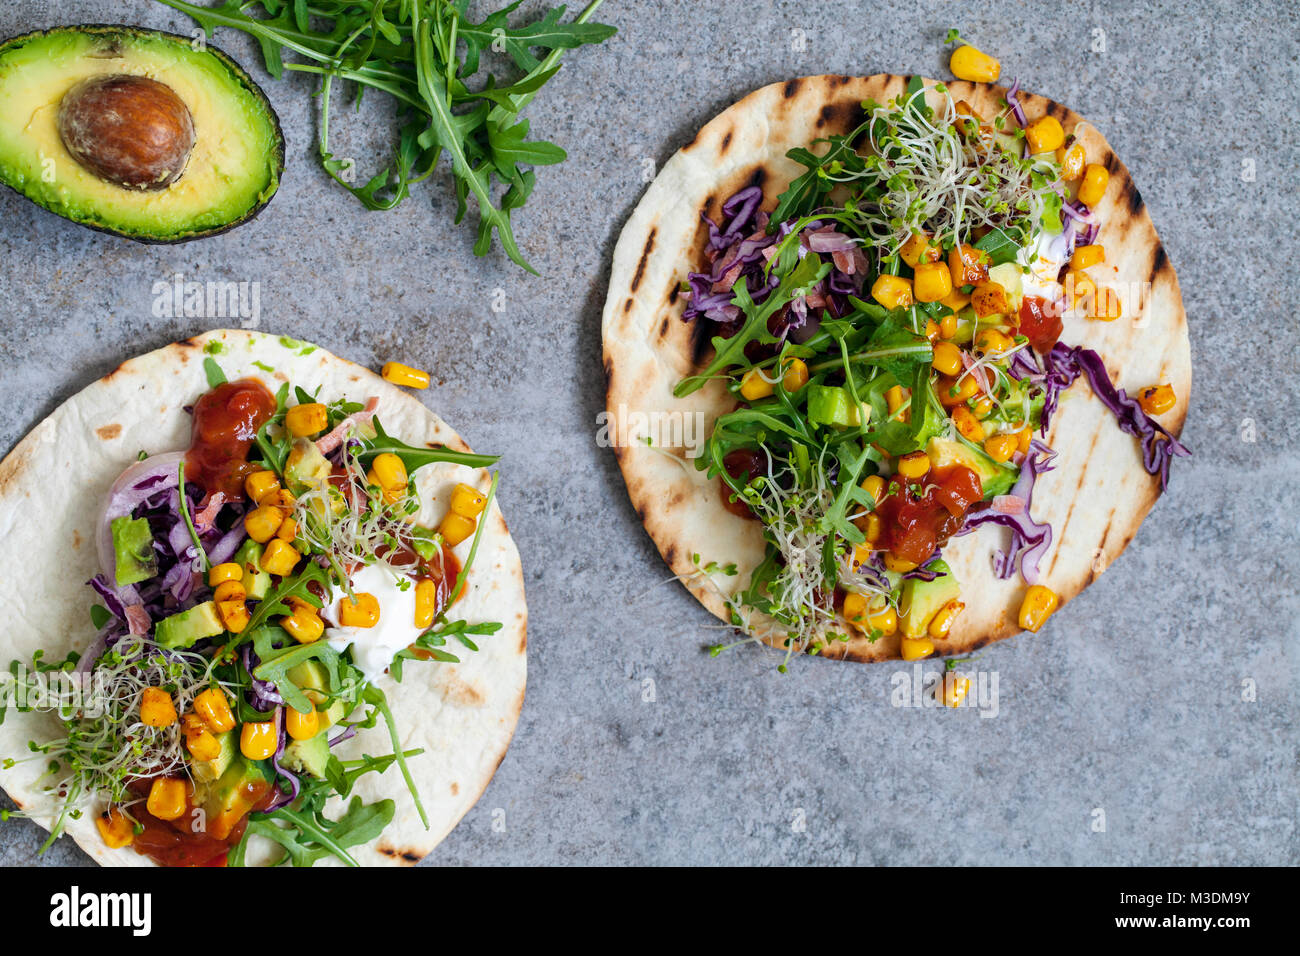 Vegan tortillas with sweetcorn, avocado, red cabbage and broccoli sprouts Stock Photo